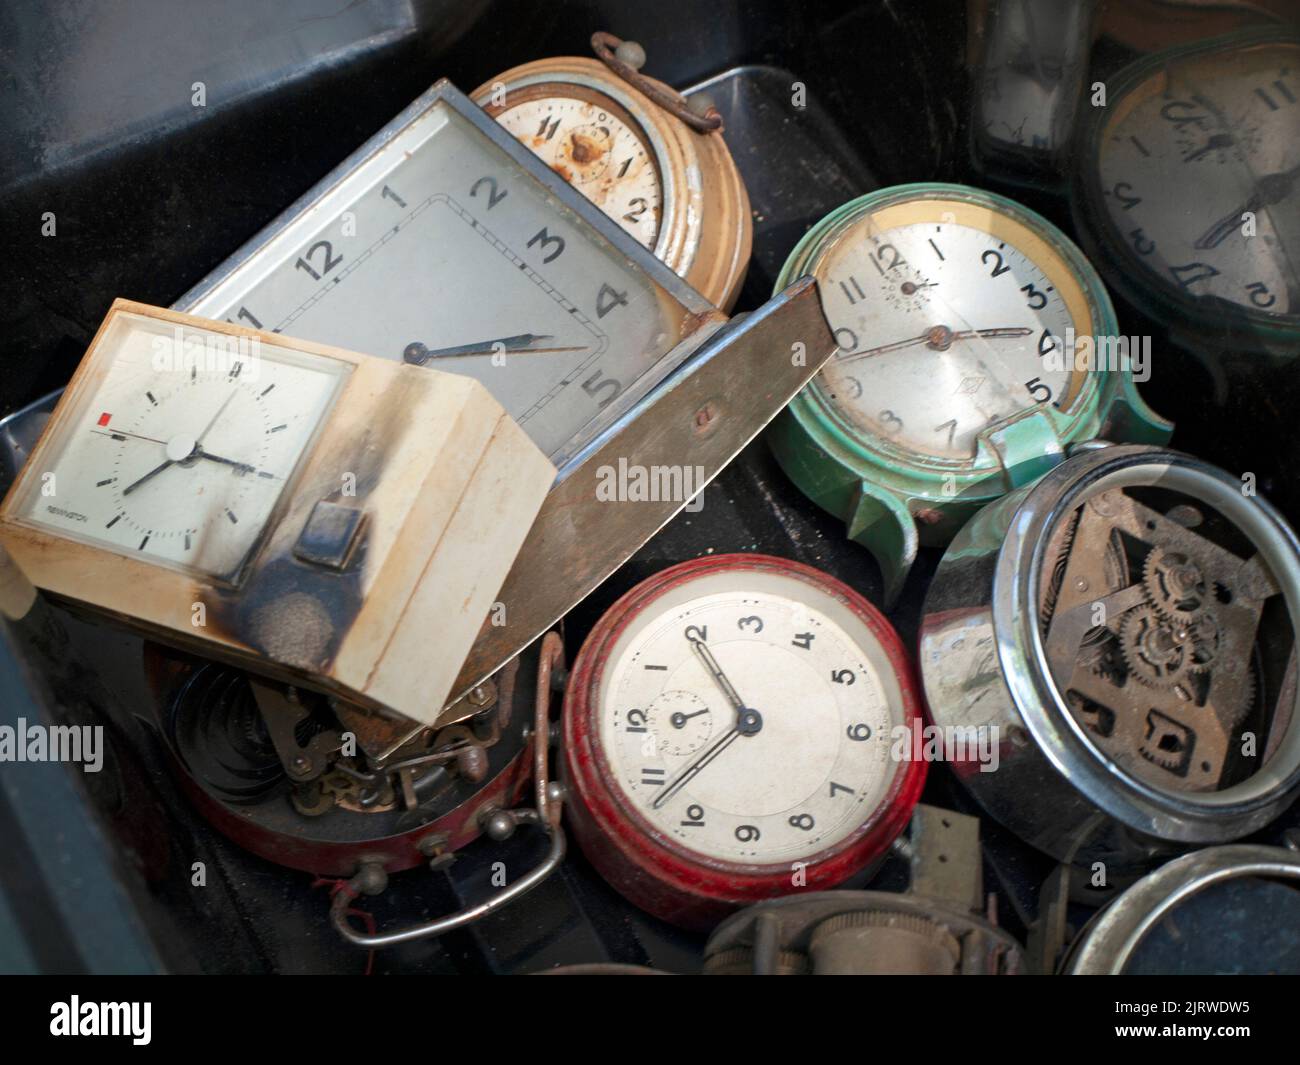 Watches for sale at the market in Saint-Chinian, Languedoc-Rousillon, France Stock Photo